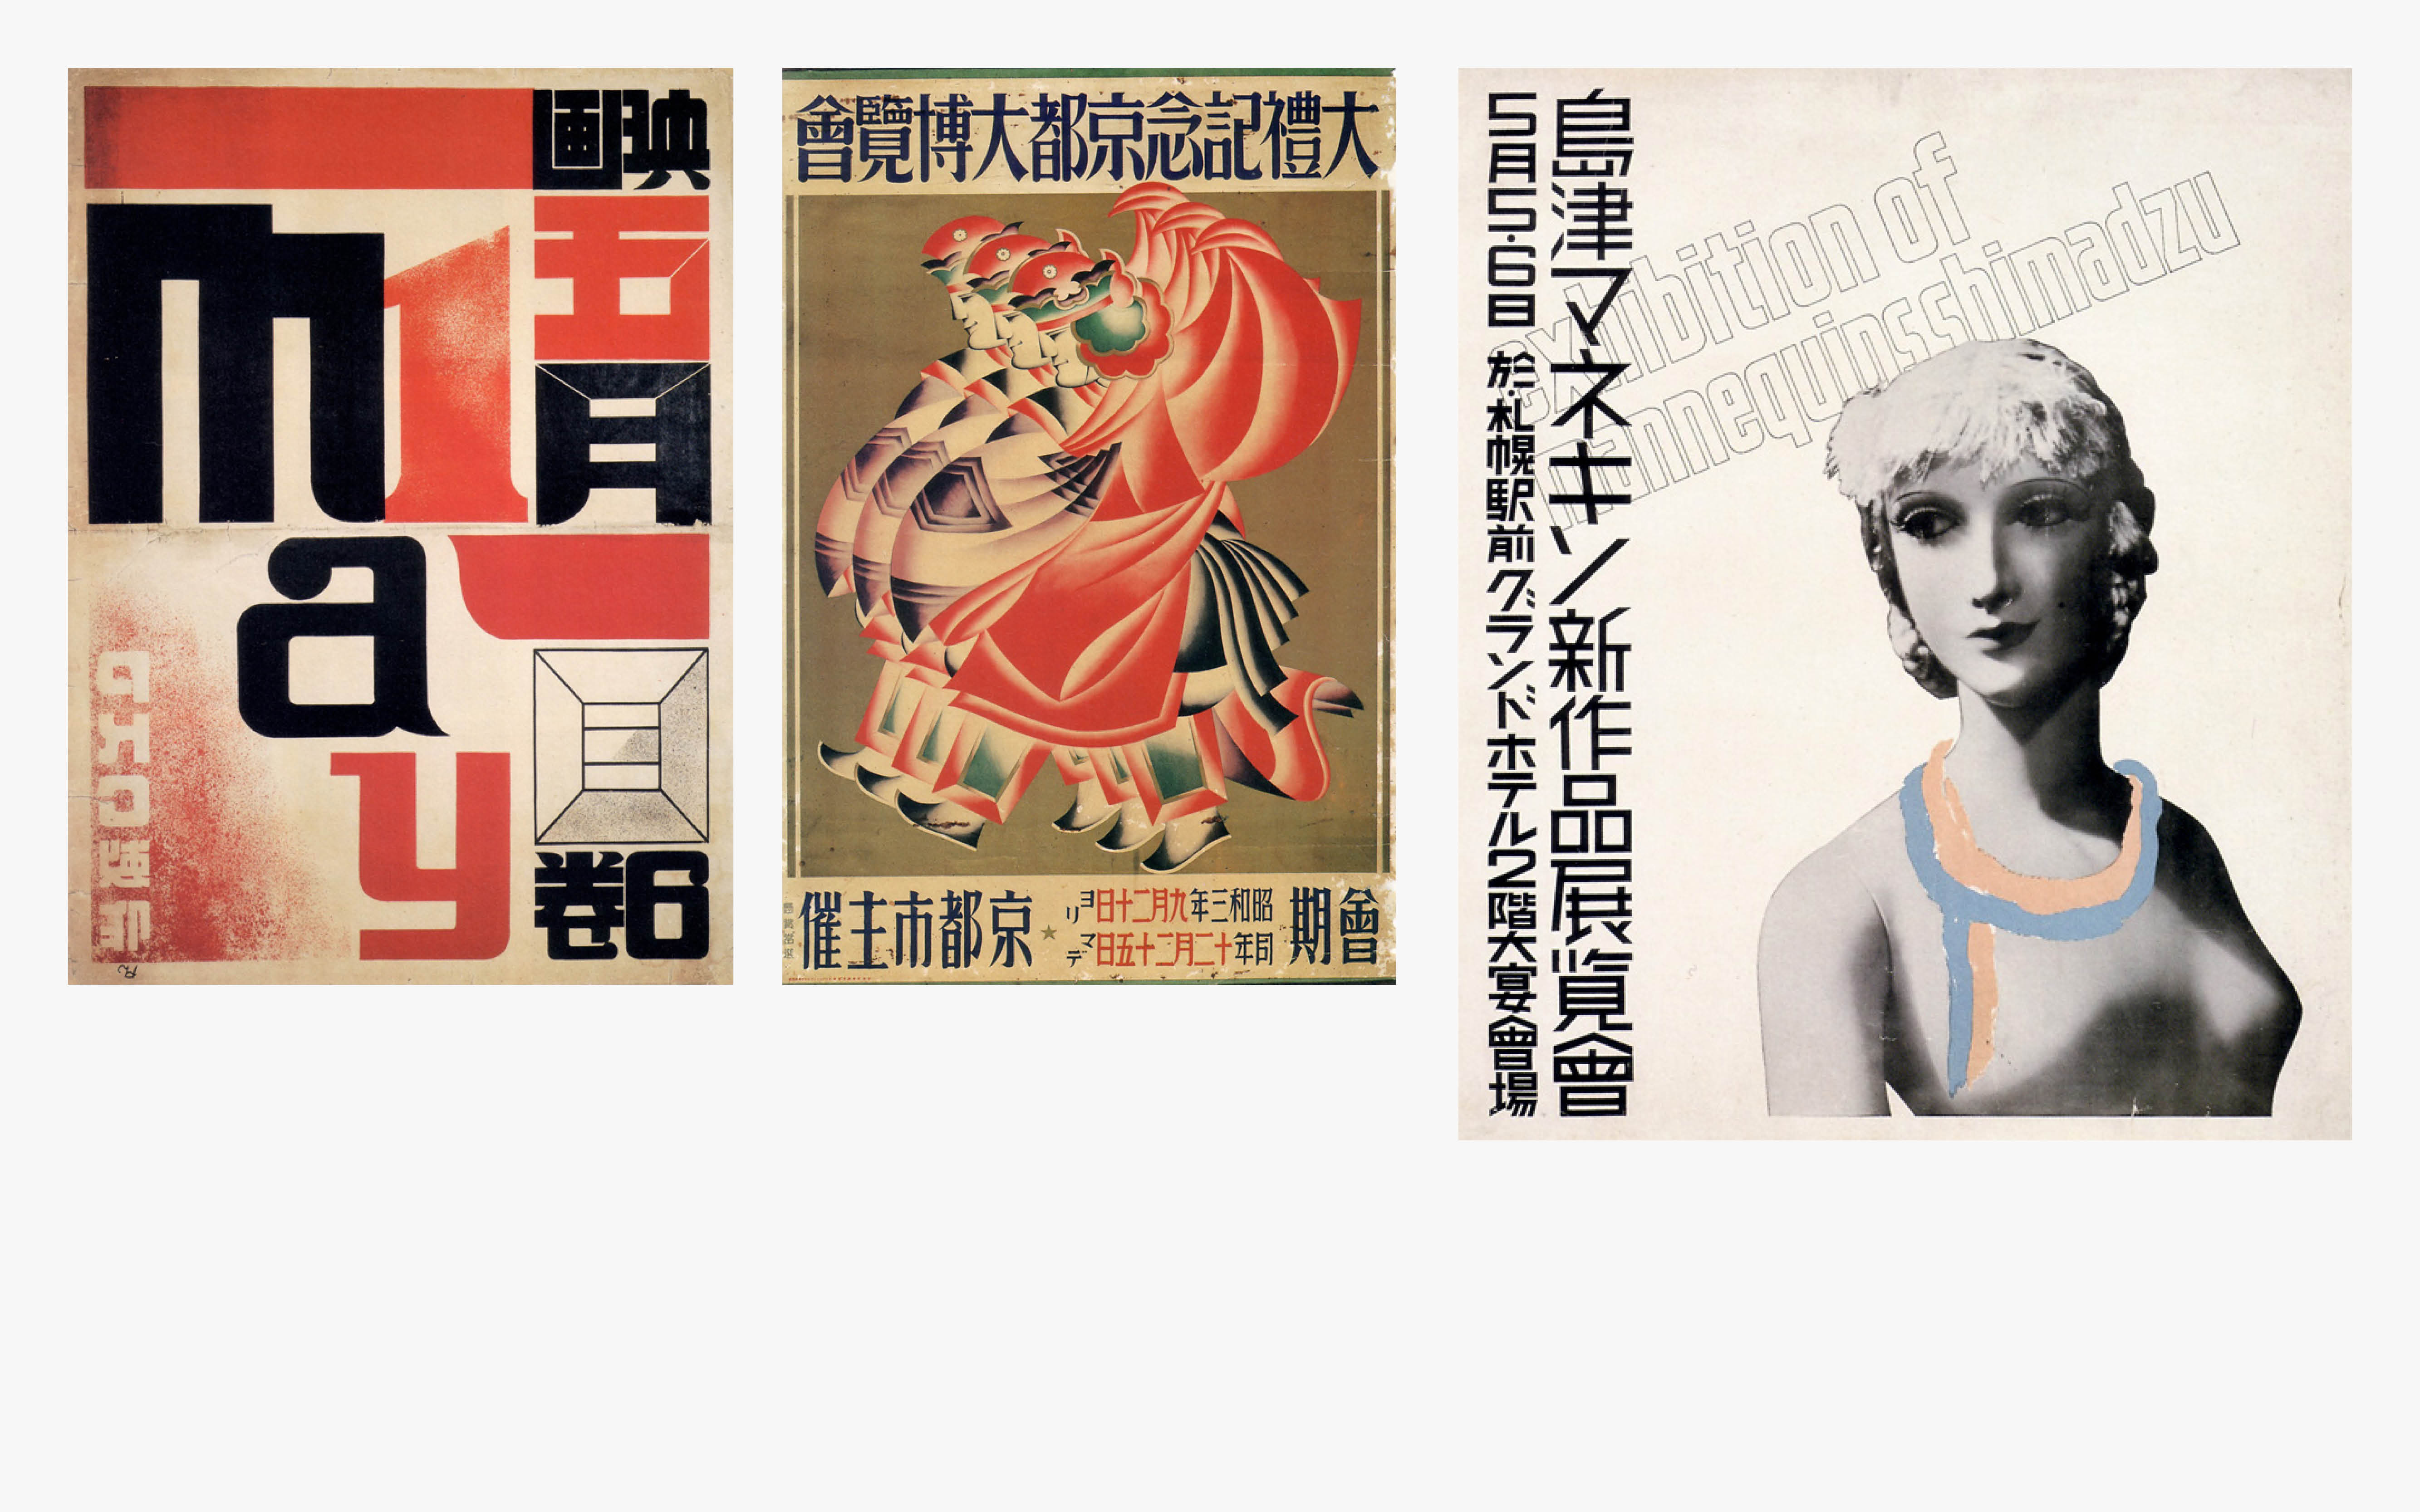 Cultural and commercial posters were mostly influenced by the western style (1925, 1928, 1935).